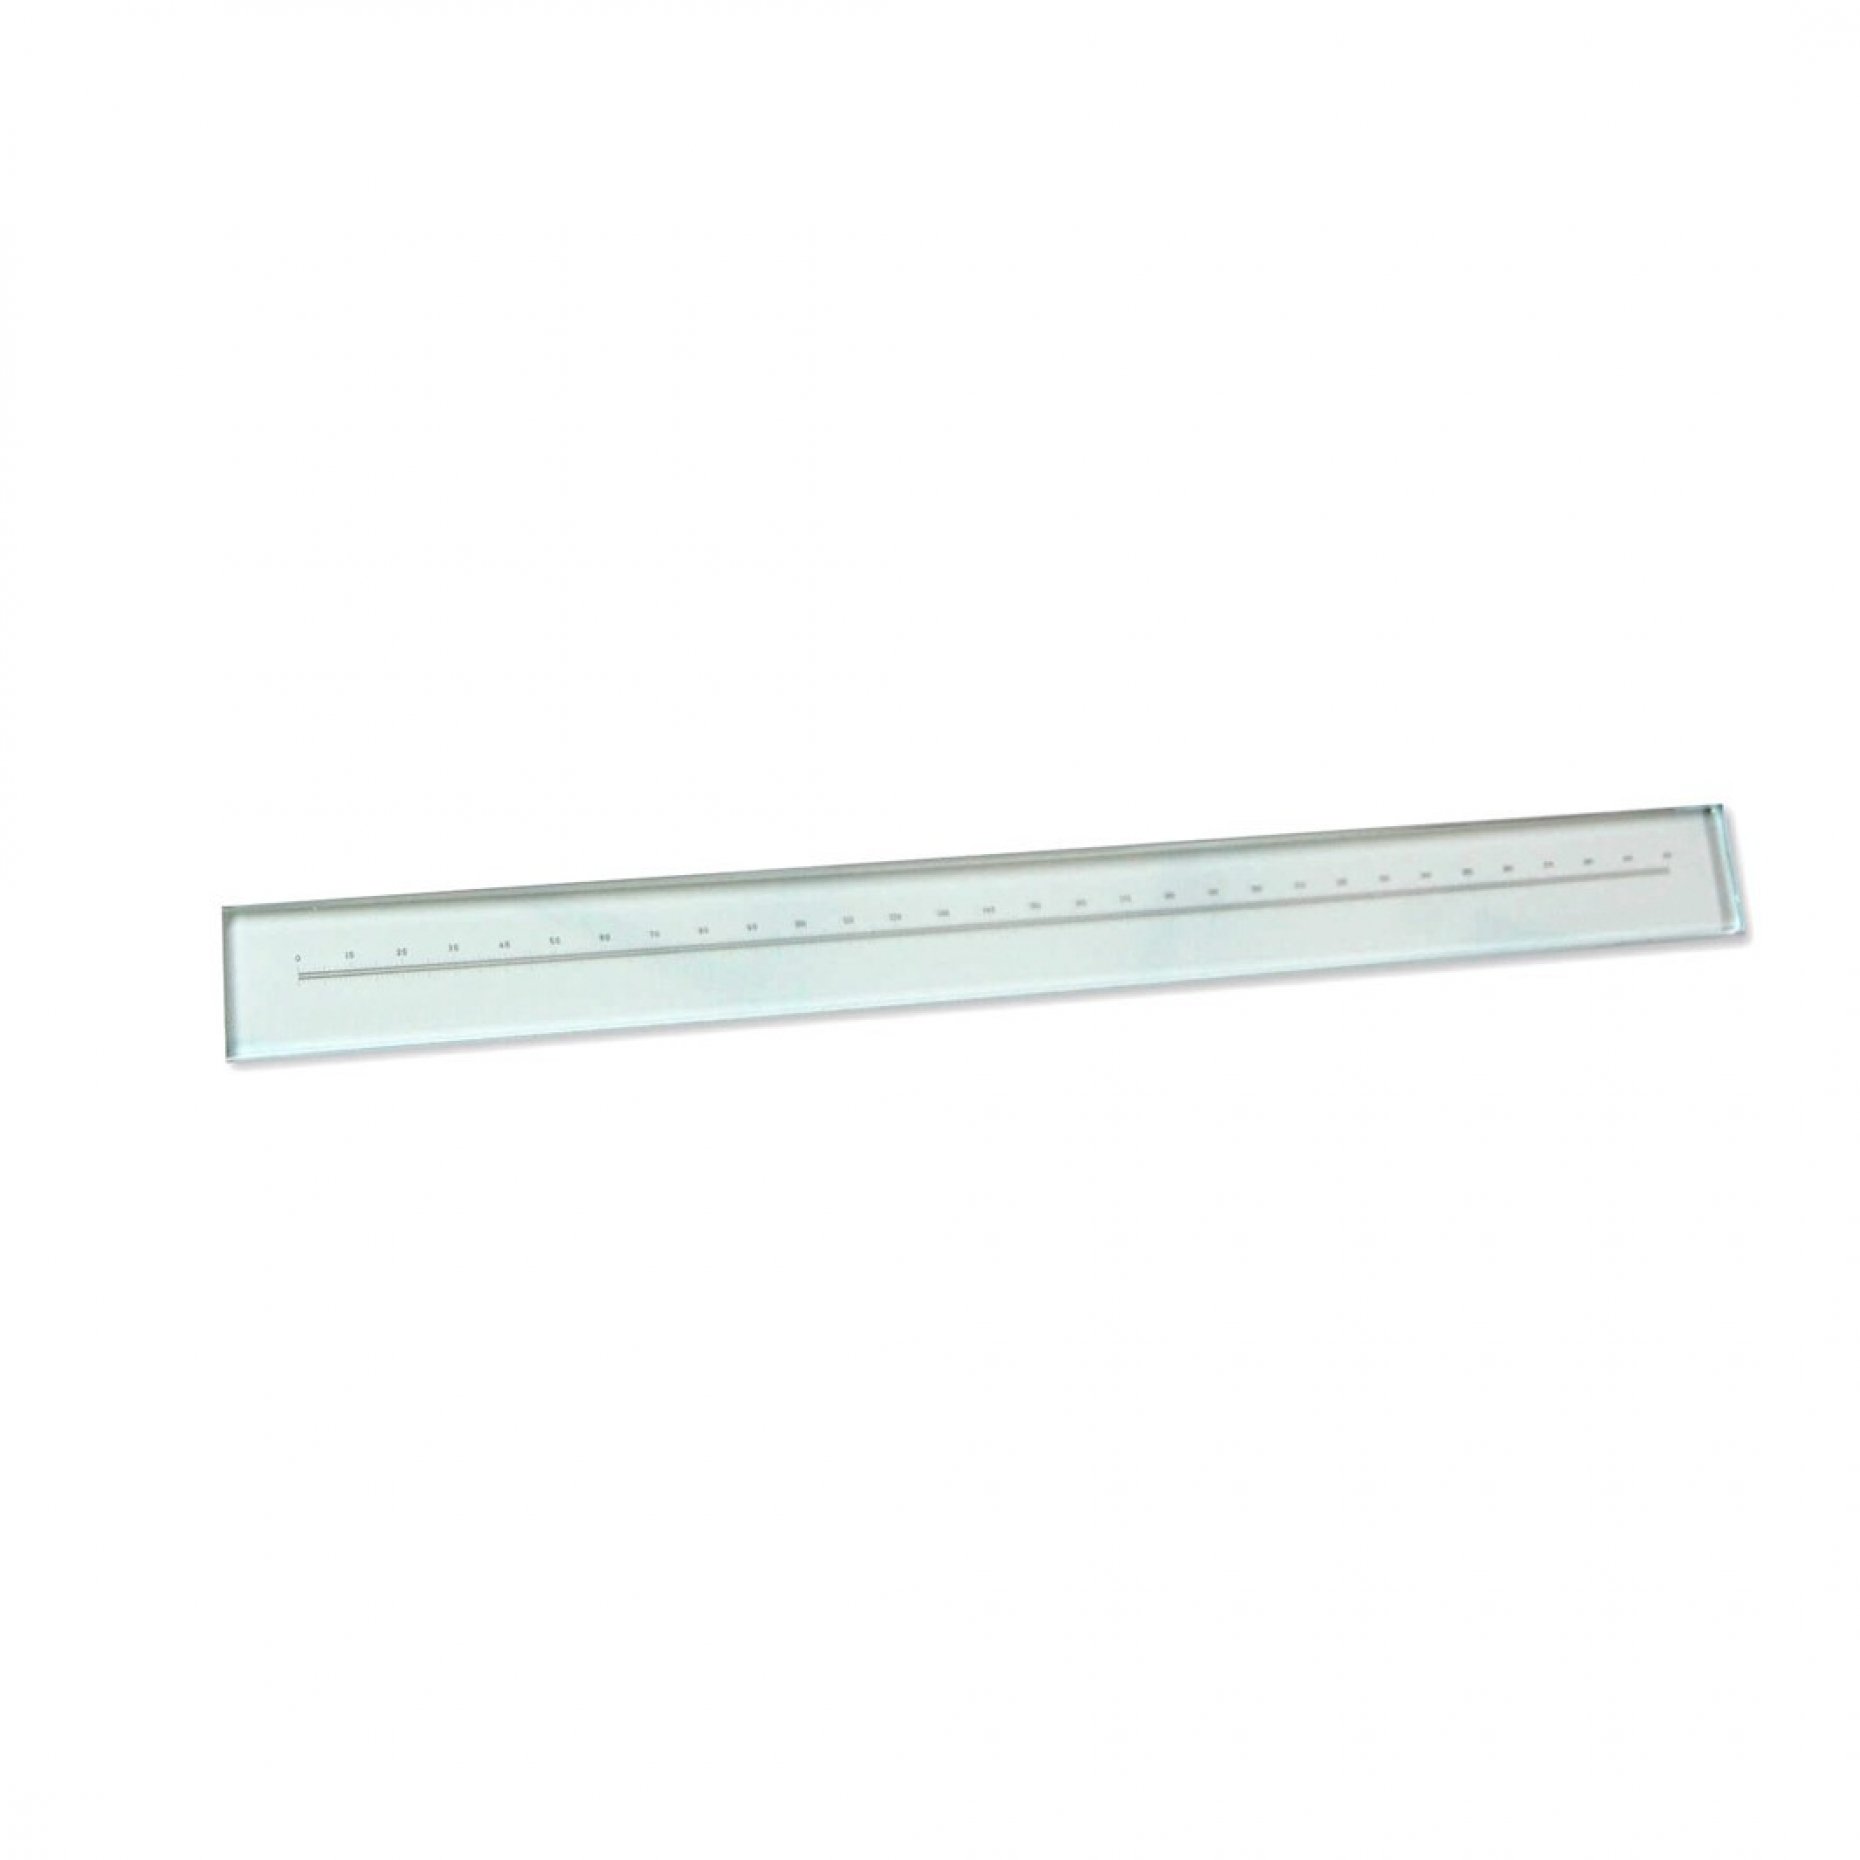 PCA300 Replacement Scale 300mm/0.1mm